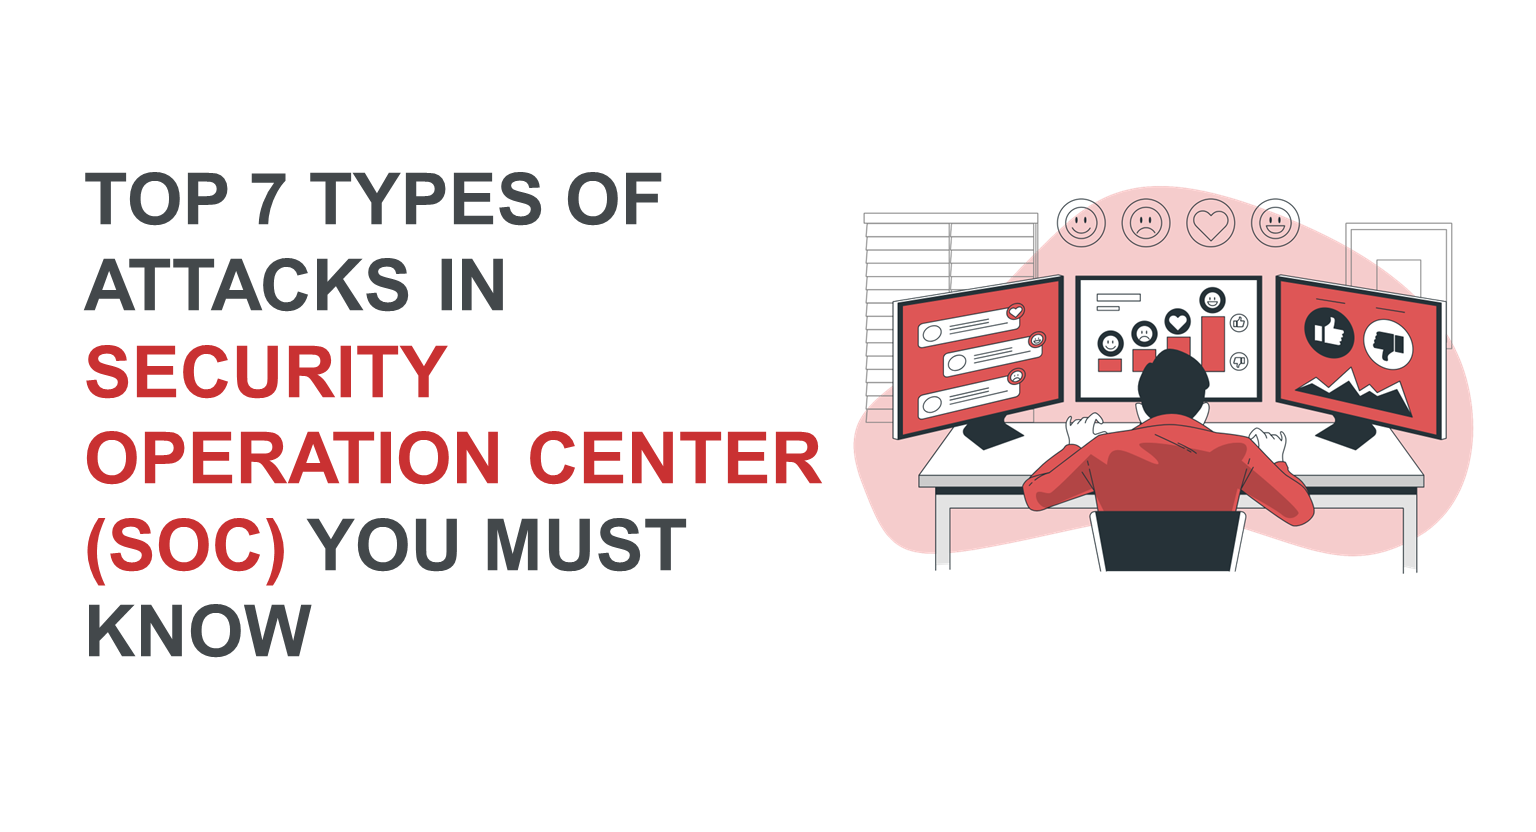 Top 7 types of attacks in security operation center (SOC) you must know